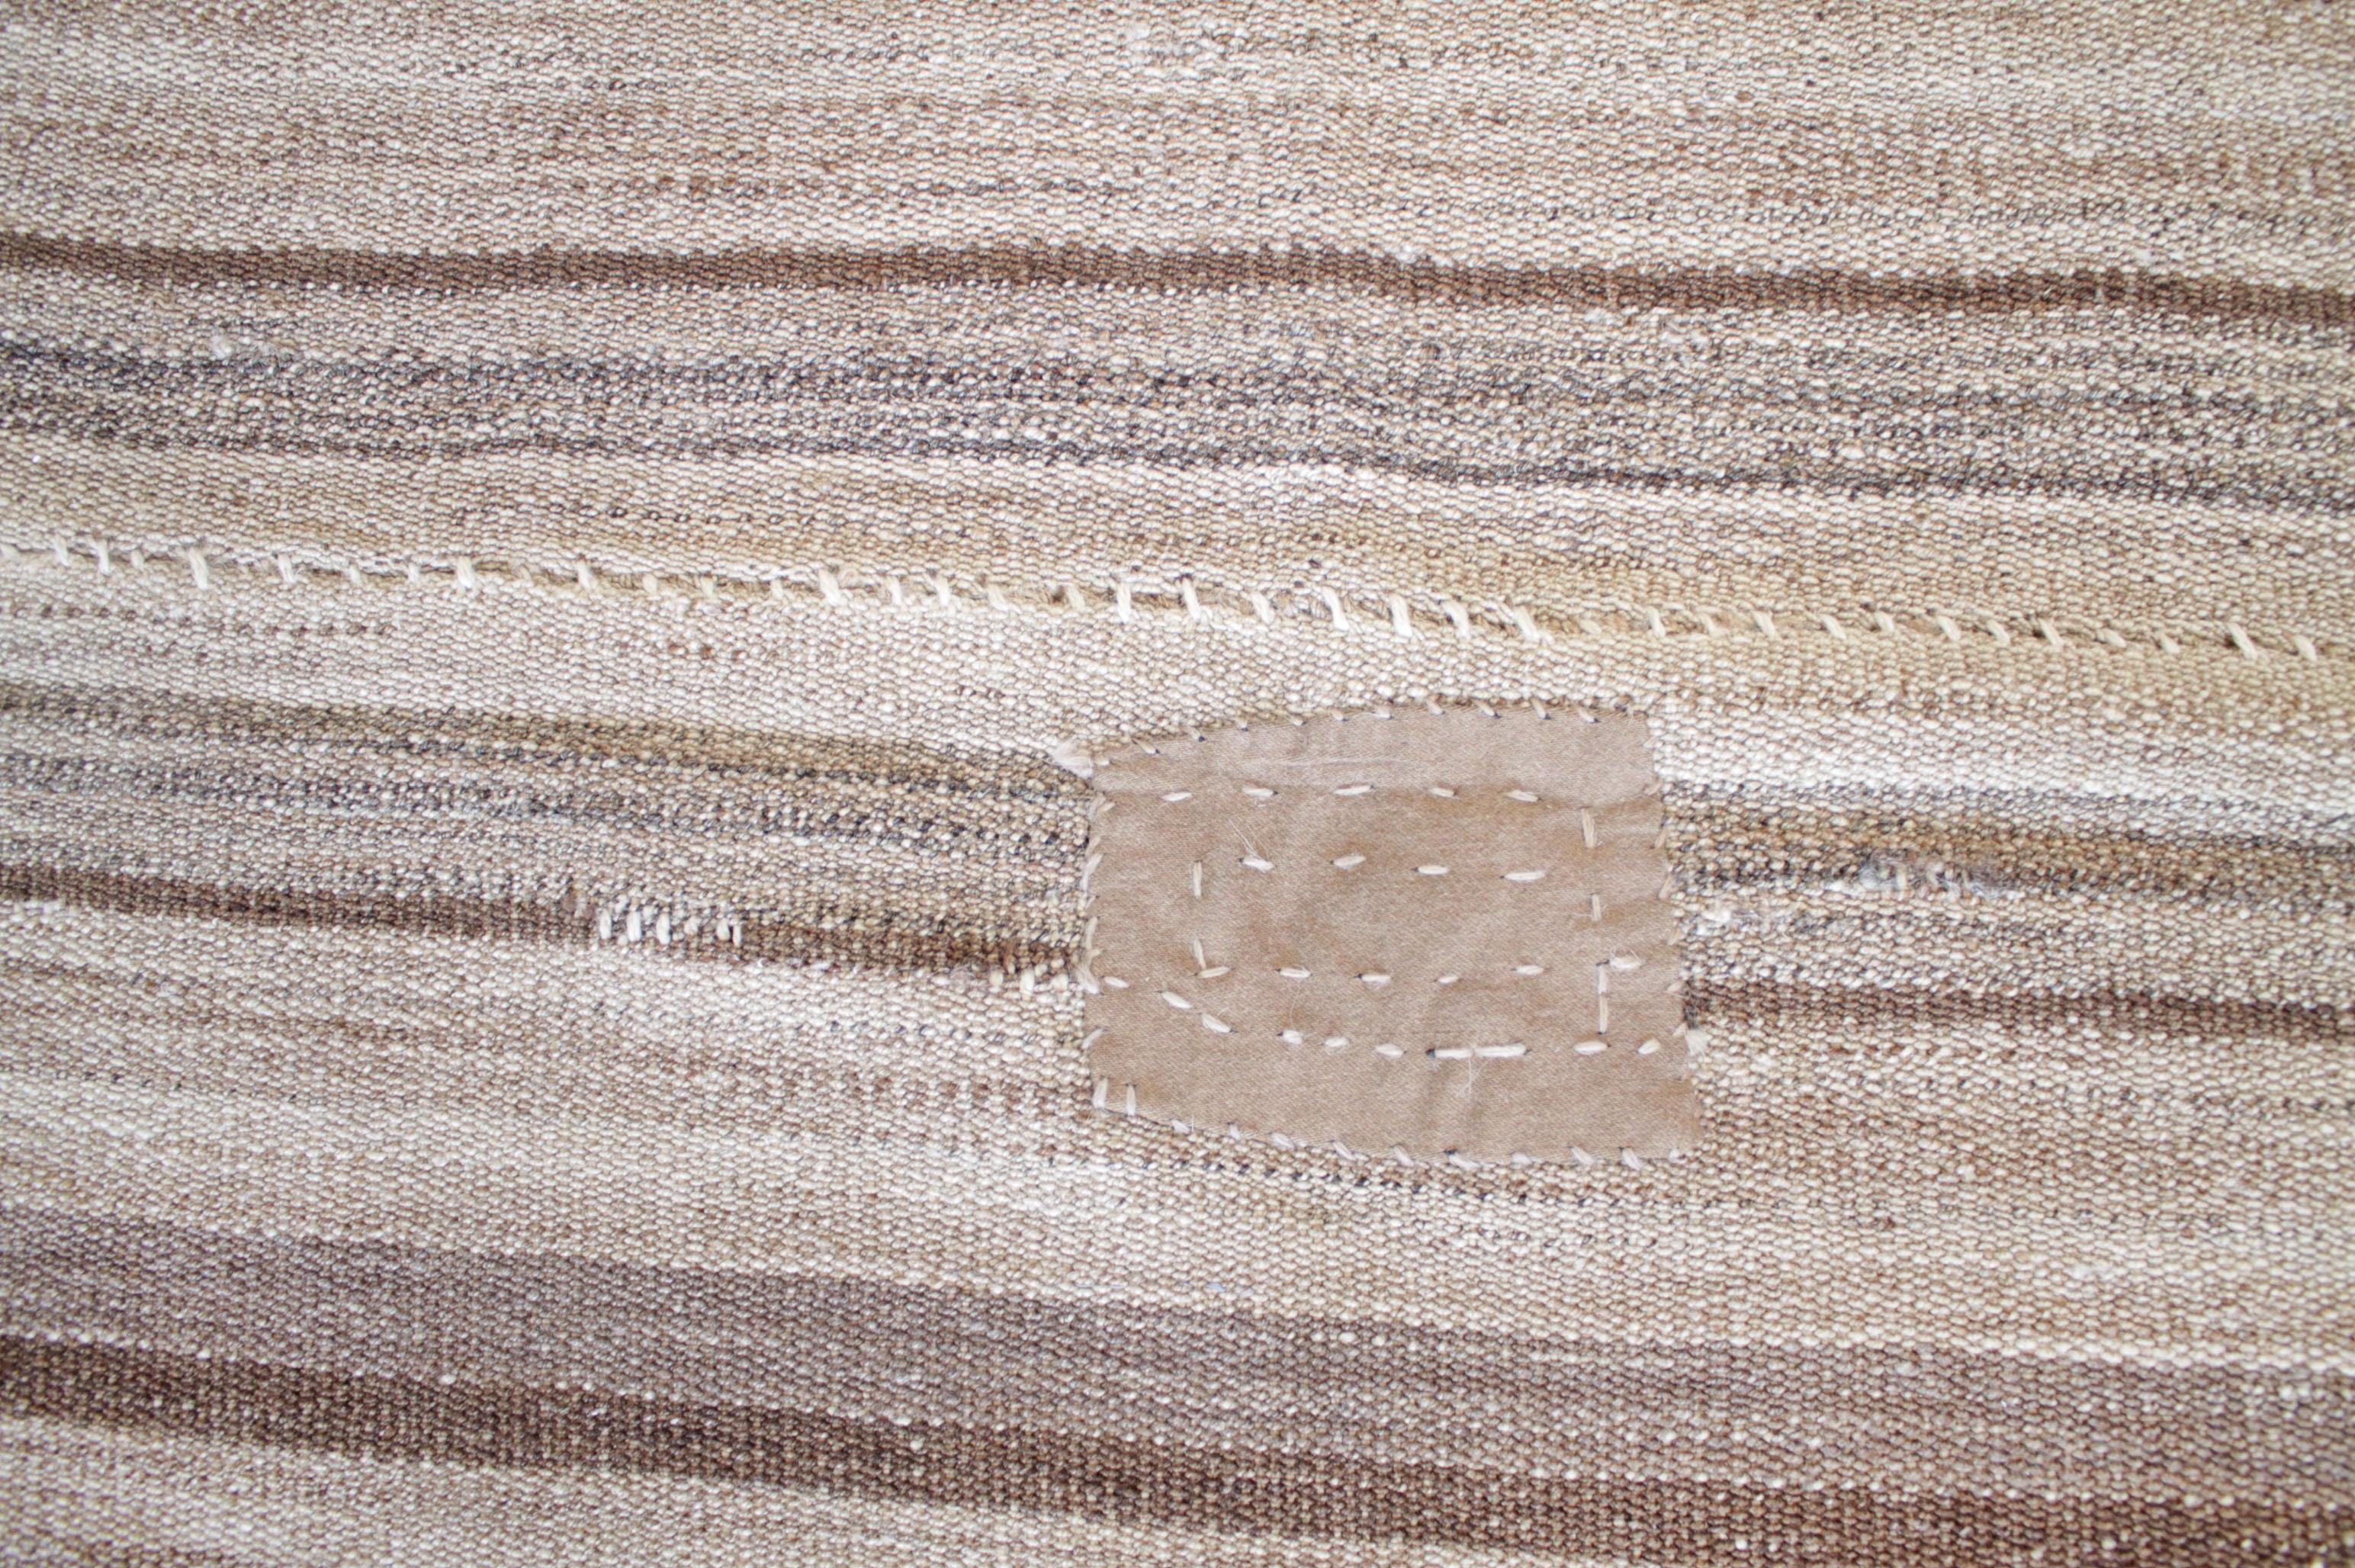 Wool Vintage Hemp Turkish Stripe Rug in Tan with Brown Tone Colored Stripes For Sale